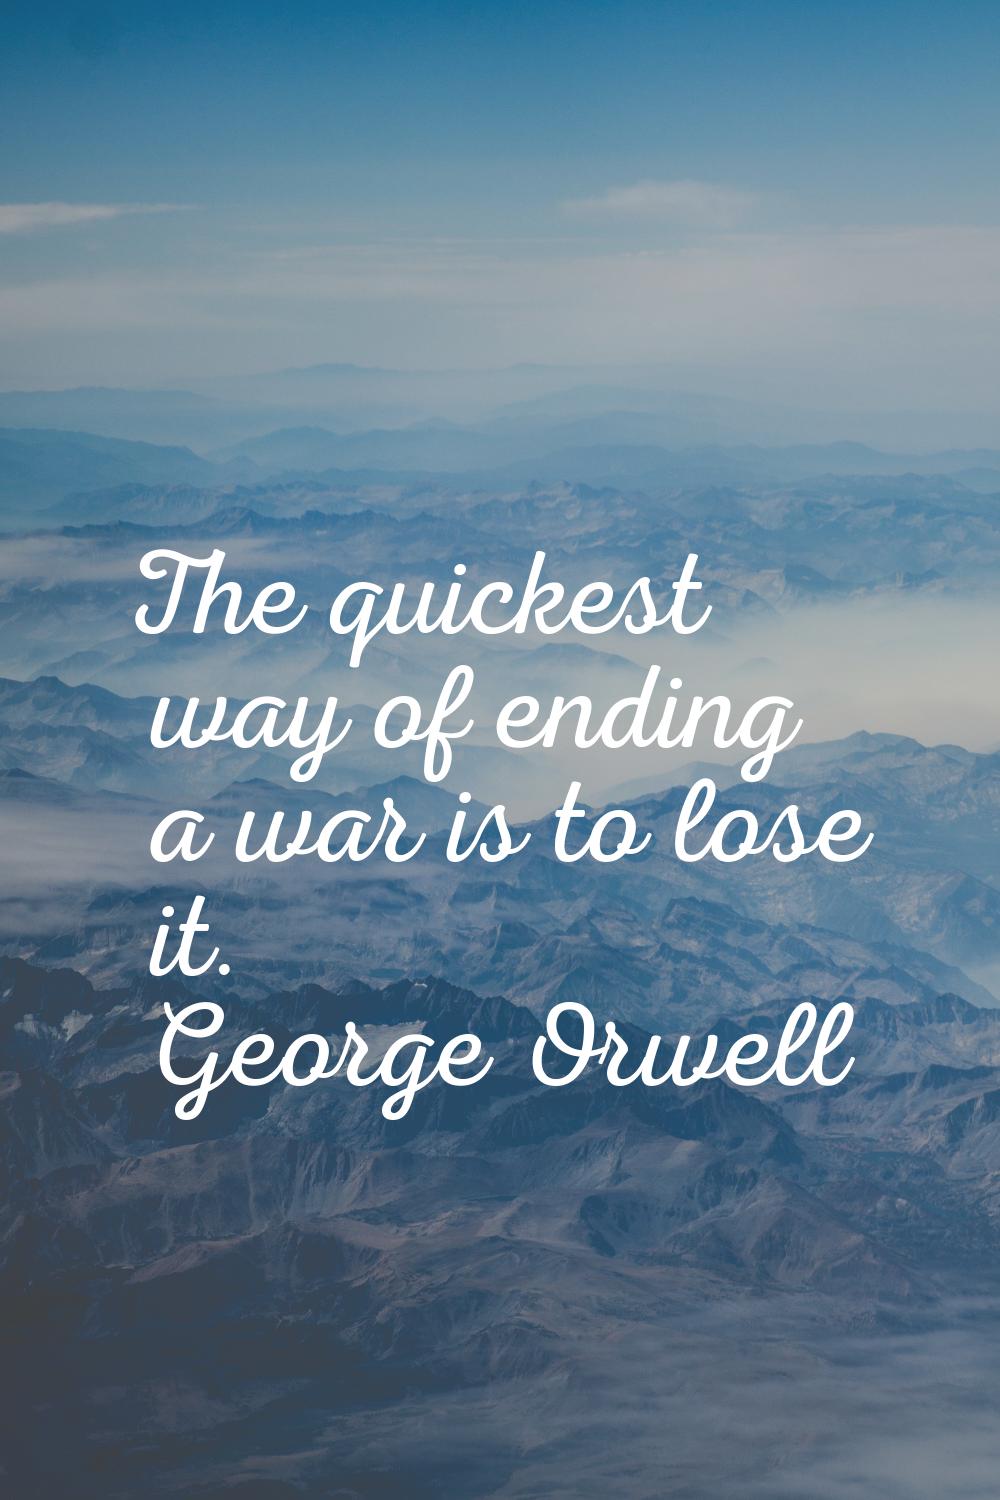 The quickest way of ending a war is to lose it.